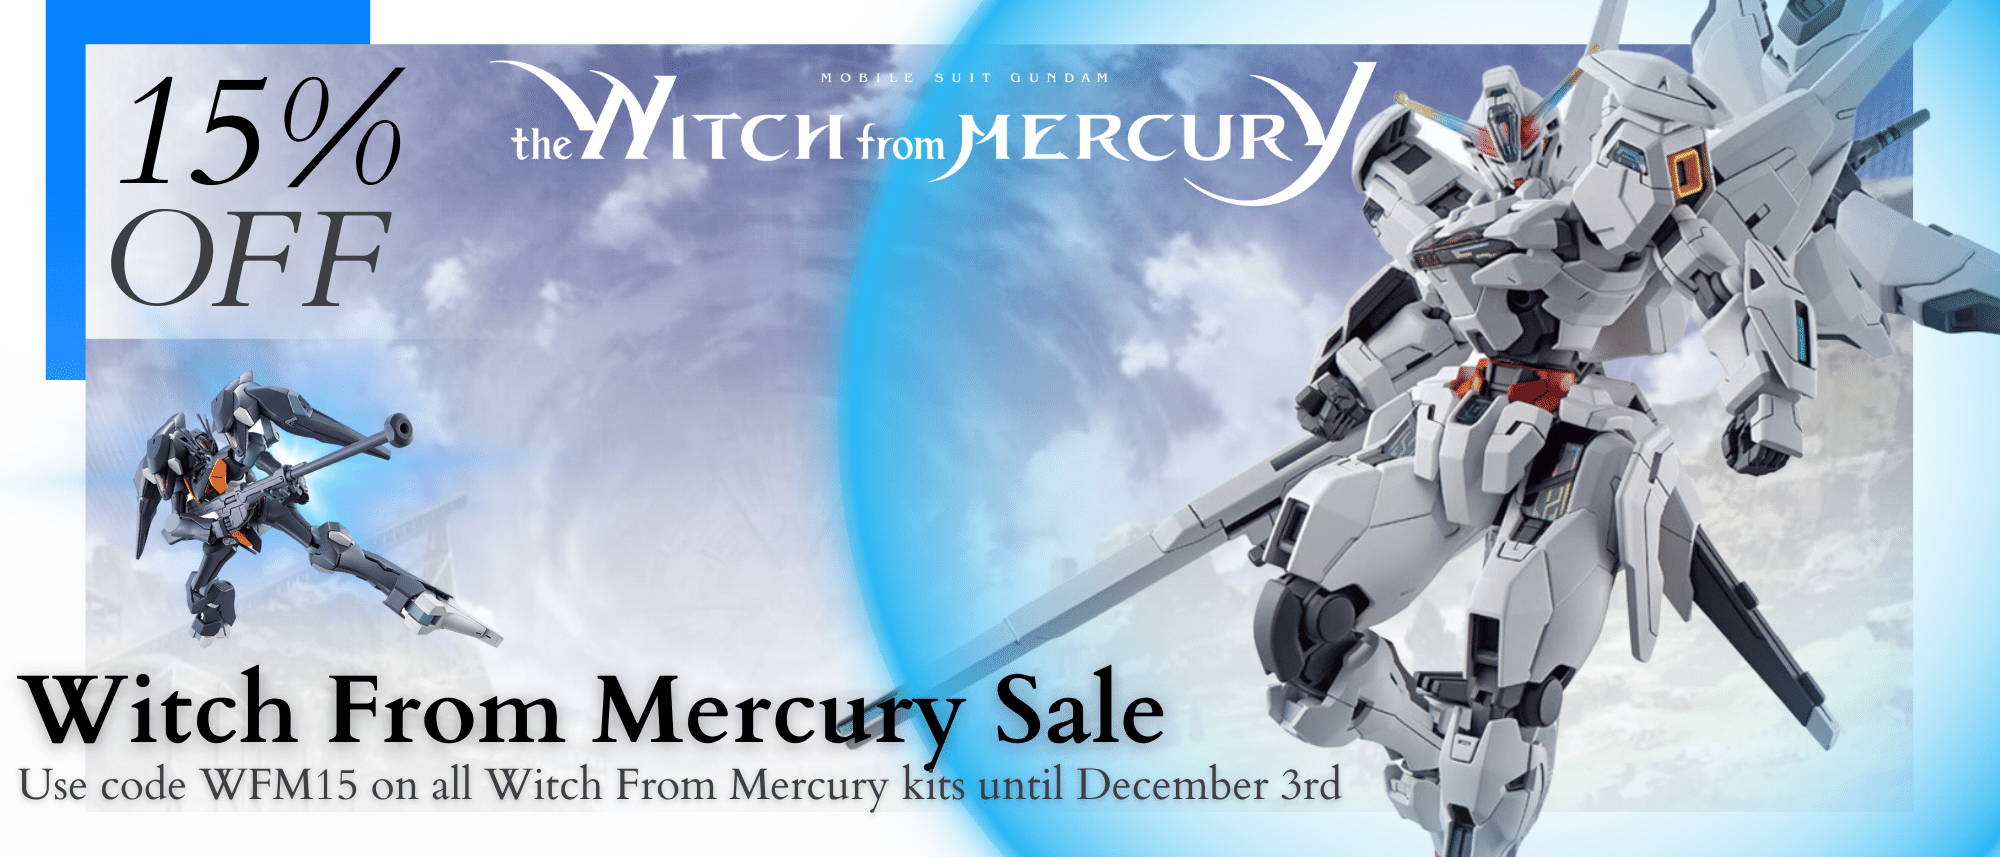 Get 15% Off Gundam Witch From Mercury at BC Hobbies Until December 3rd